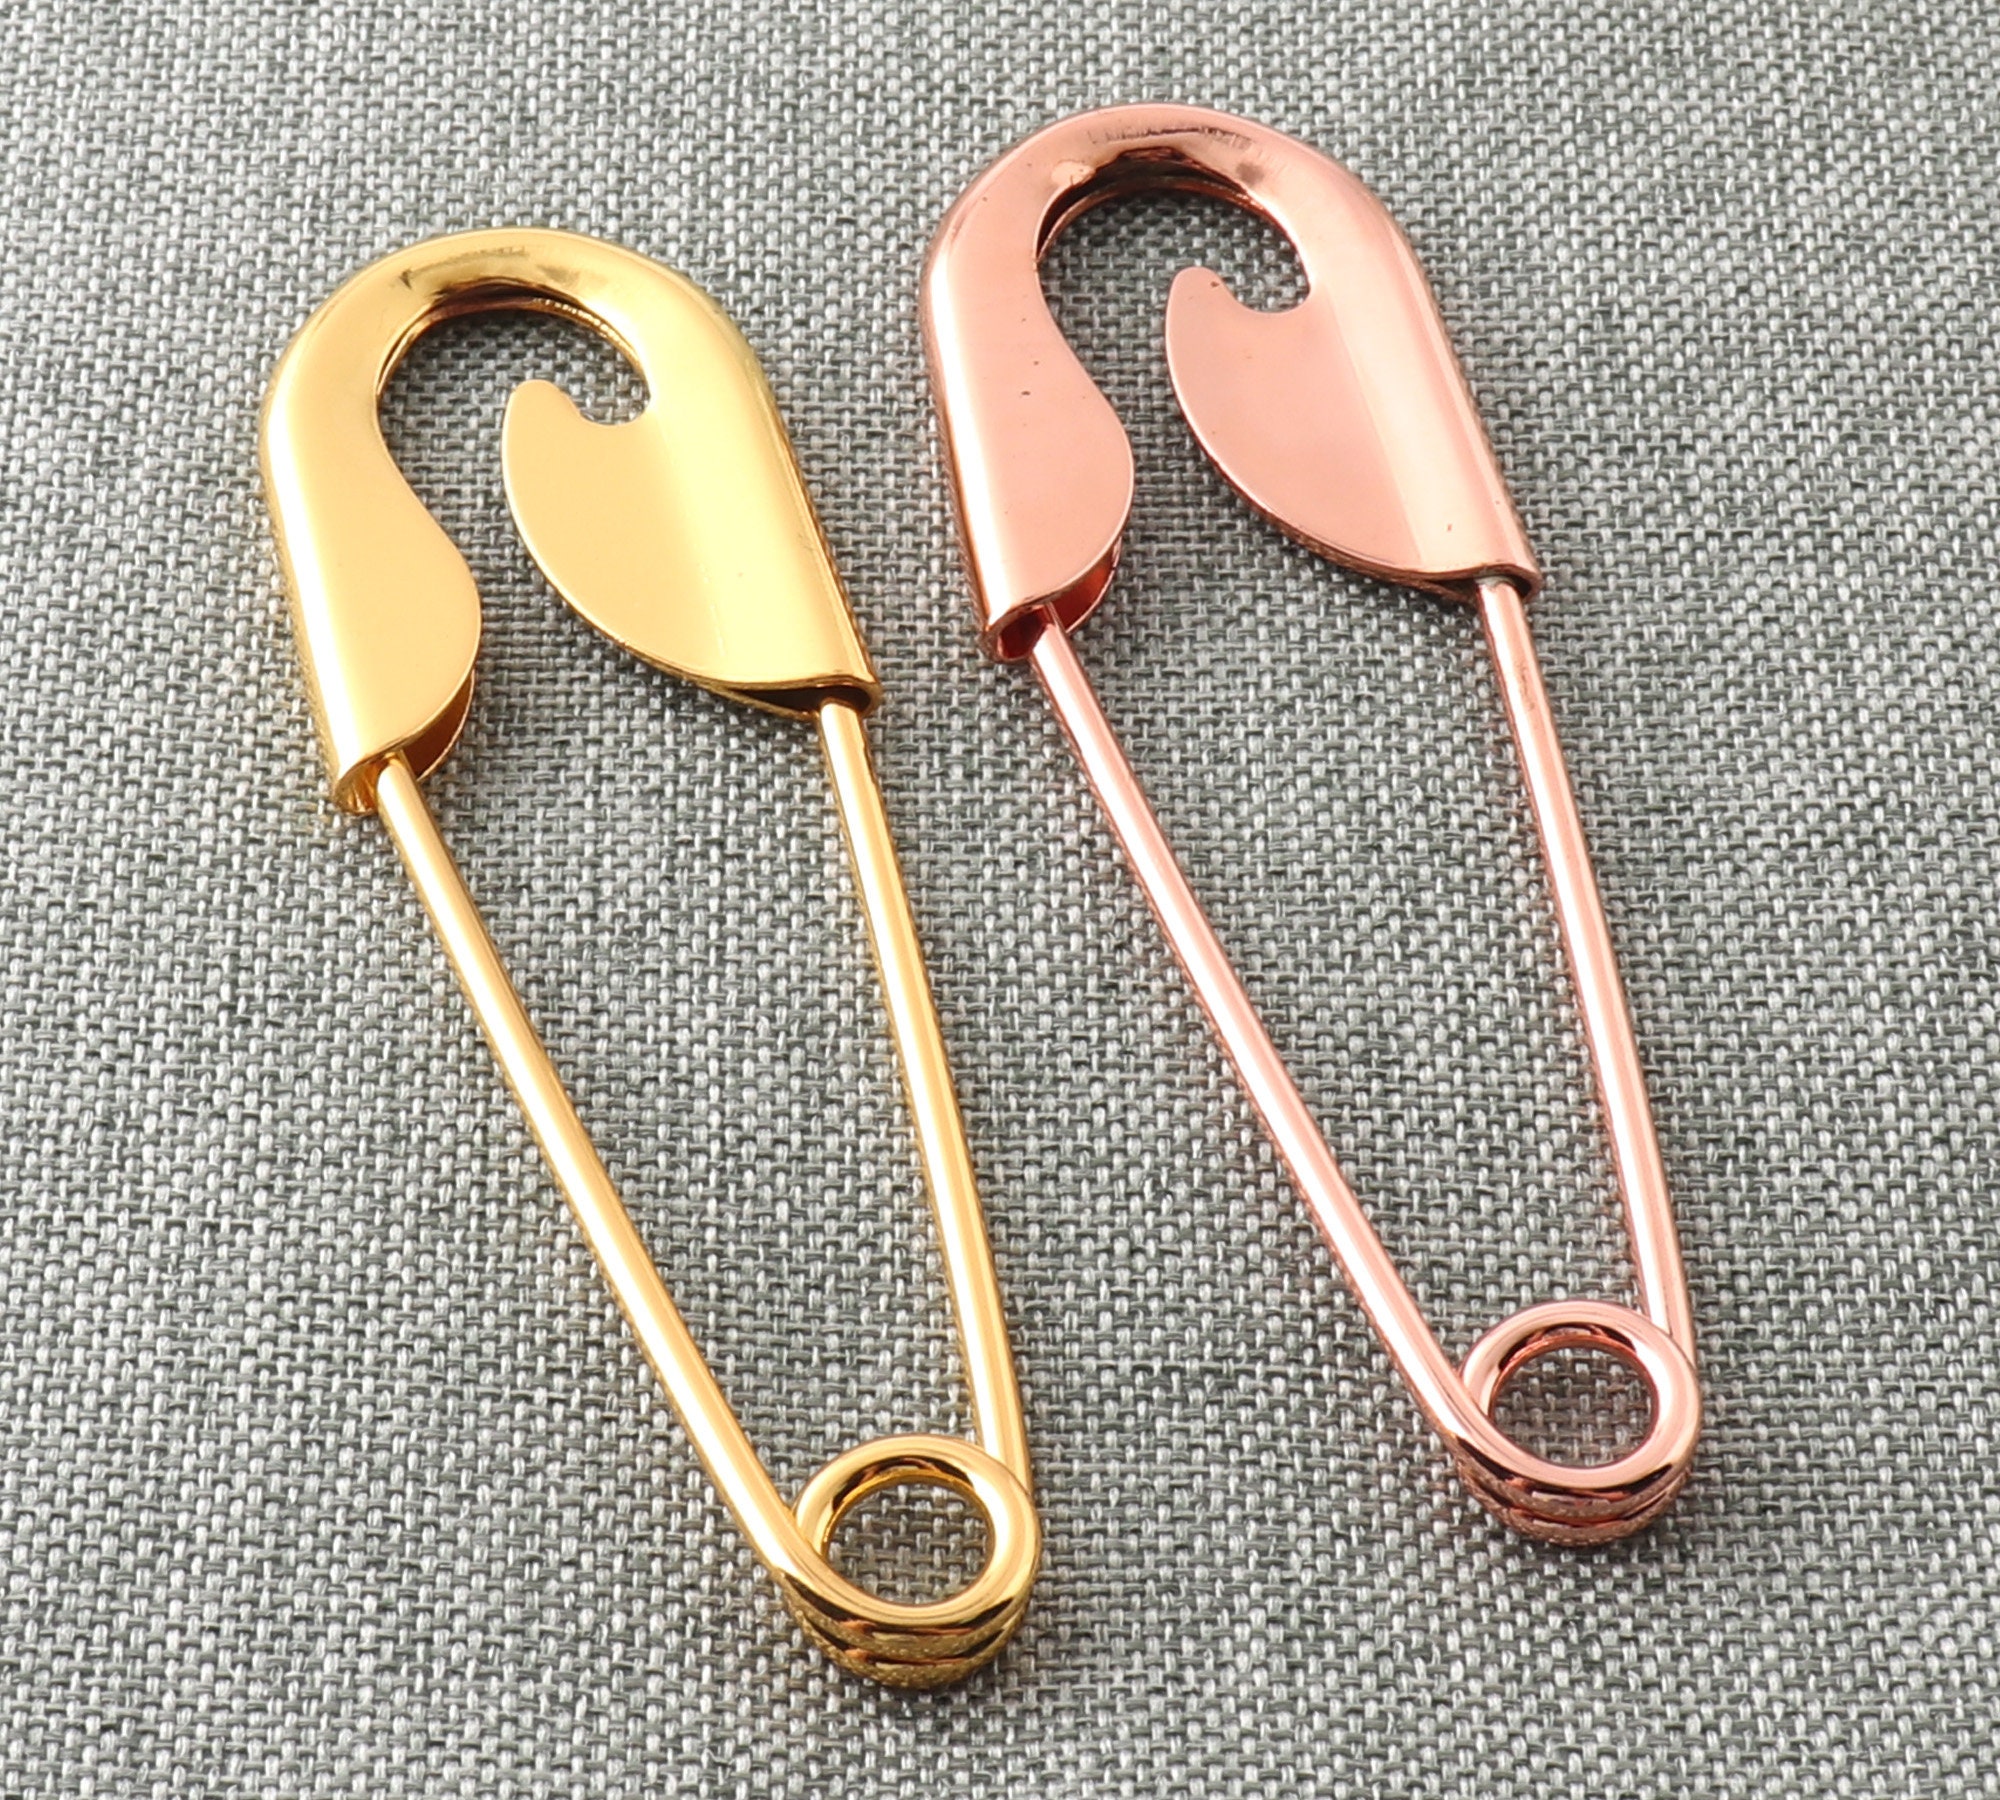 Rose Gold/silver Large Safety Pins,5527 Mm Brooch Pin Back Safety Pin Push  Pins,metal Brooch Pins Kilt Pins for Clothes 20 Pcs 